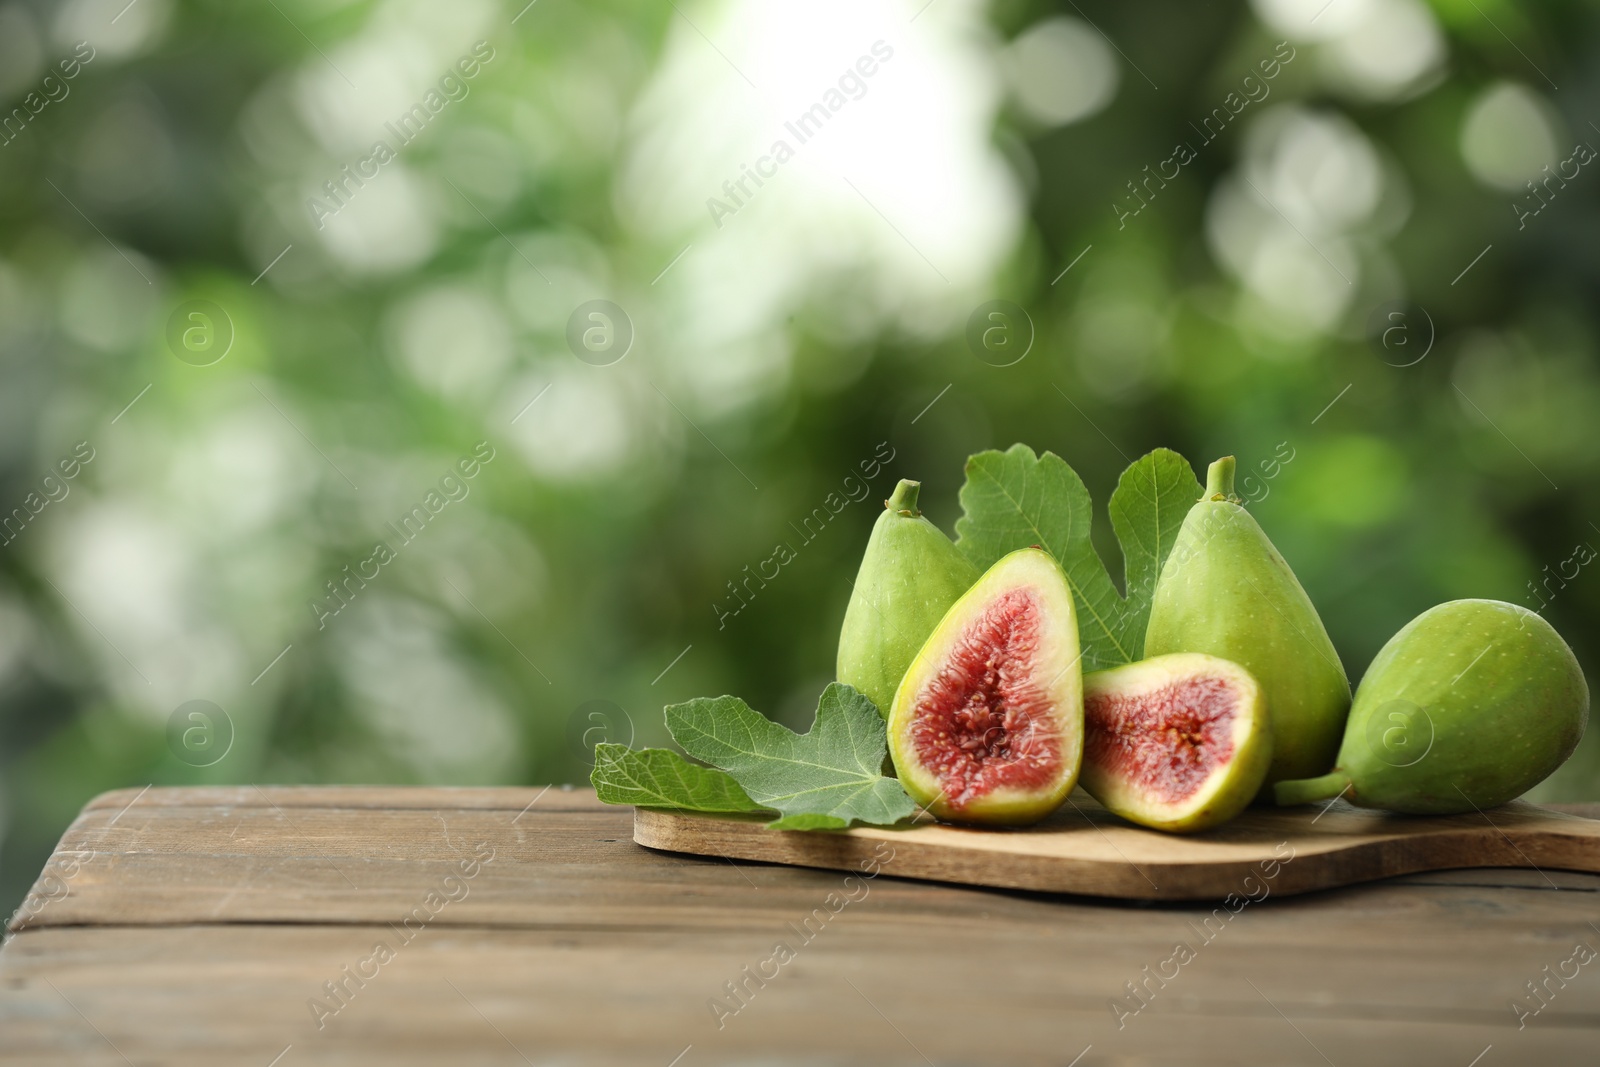 Photo of Cut and whole green figs on wooden table against blurred background, space for text